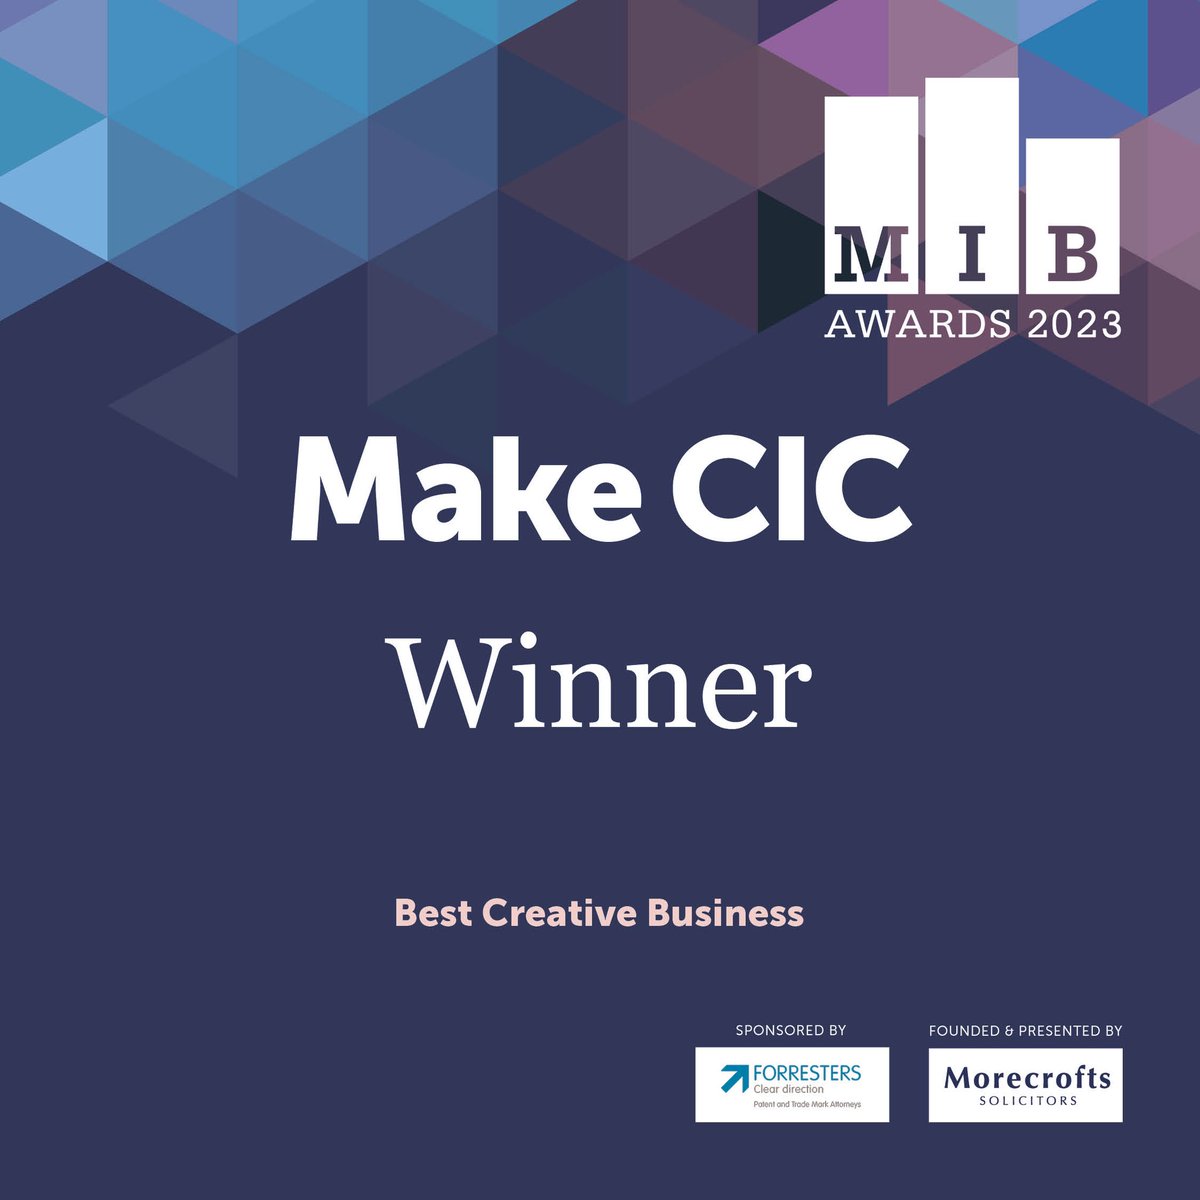 We’re delighted to announce that the Best Creative Business Award for 2023 goes to @MakeCIC - a purpose-driven social enterprise focused on uniting + enriching Merseyside communities through creativity, art and culture.   #MIB23 #MIBWinners